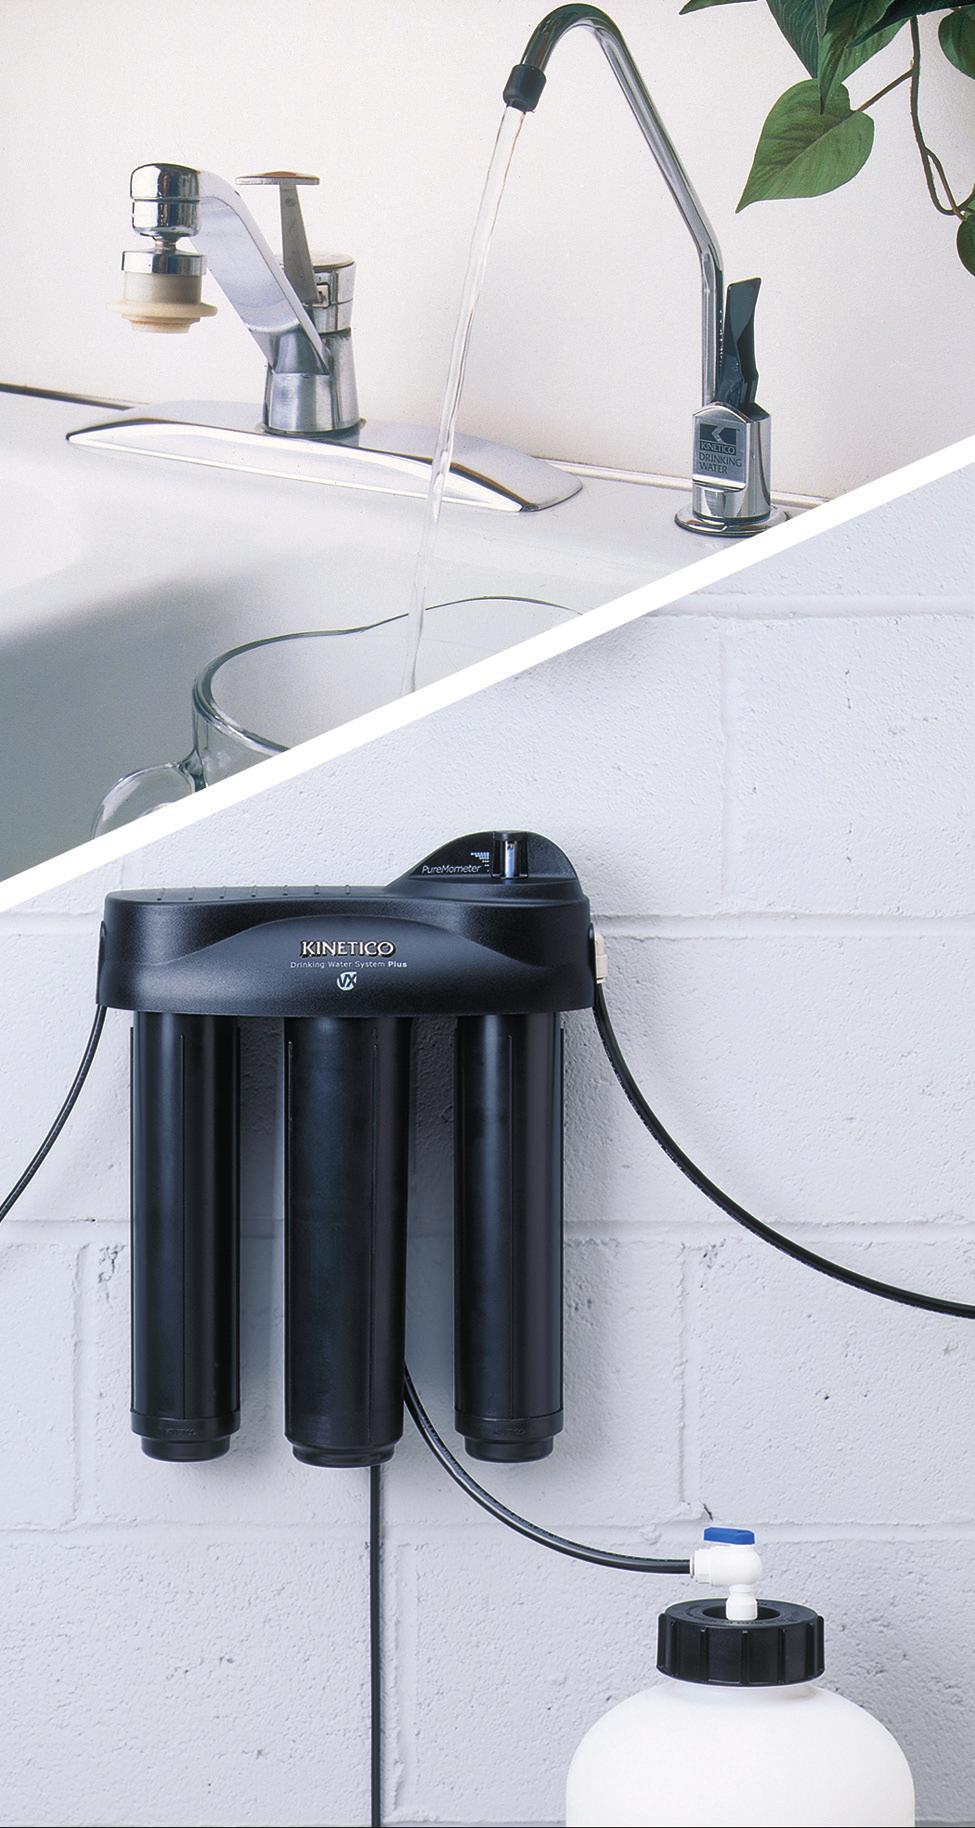 (When replacing an existing water softener, choose a demand-control softener if possible.